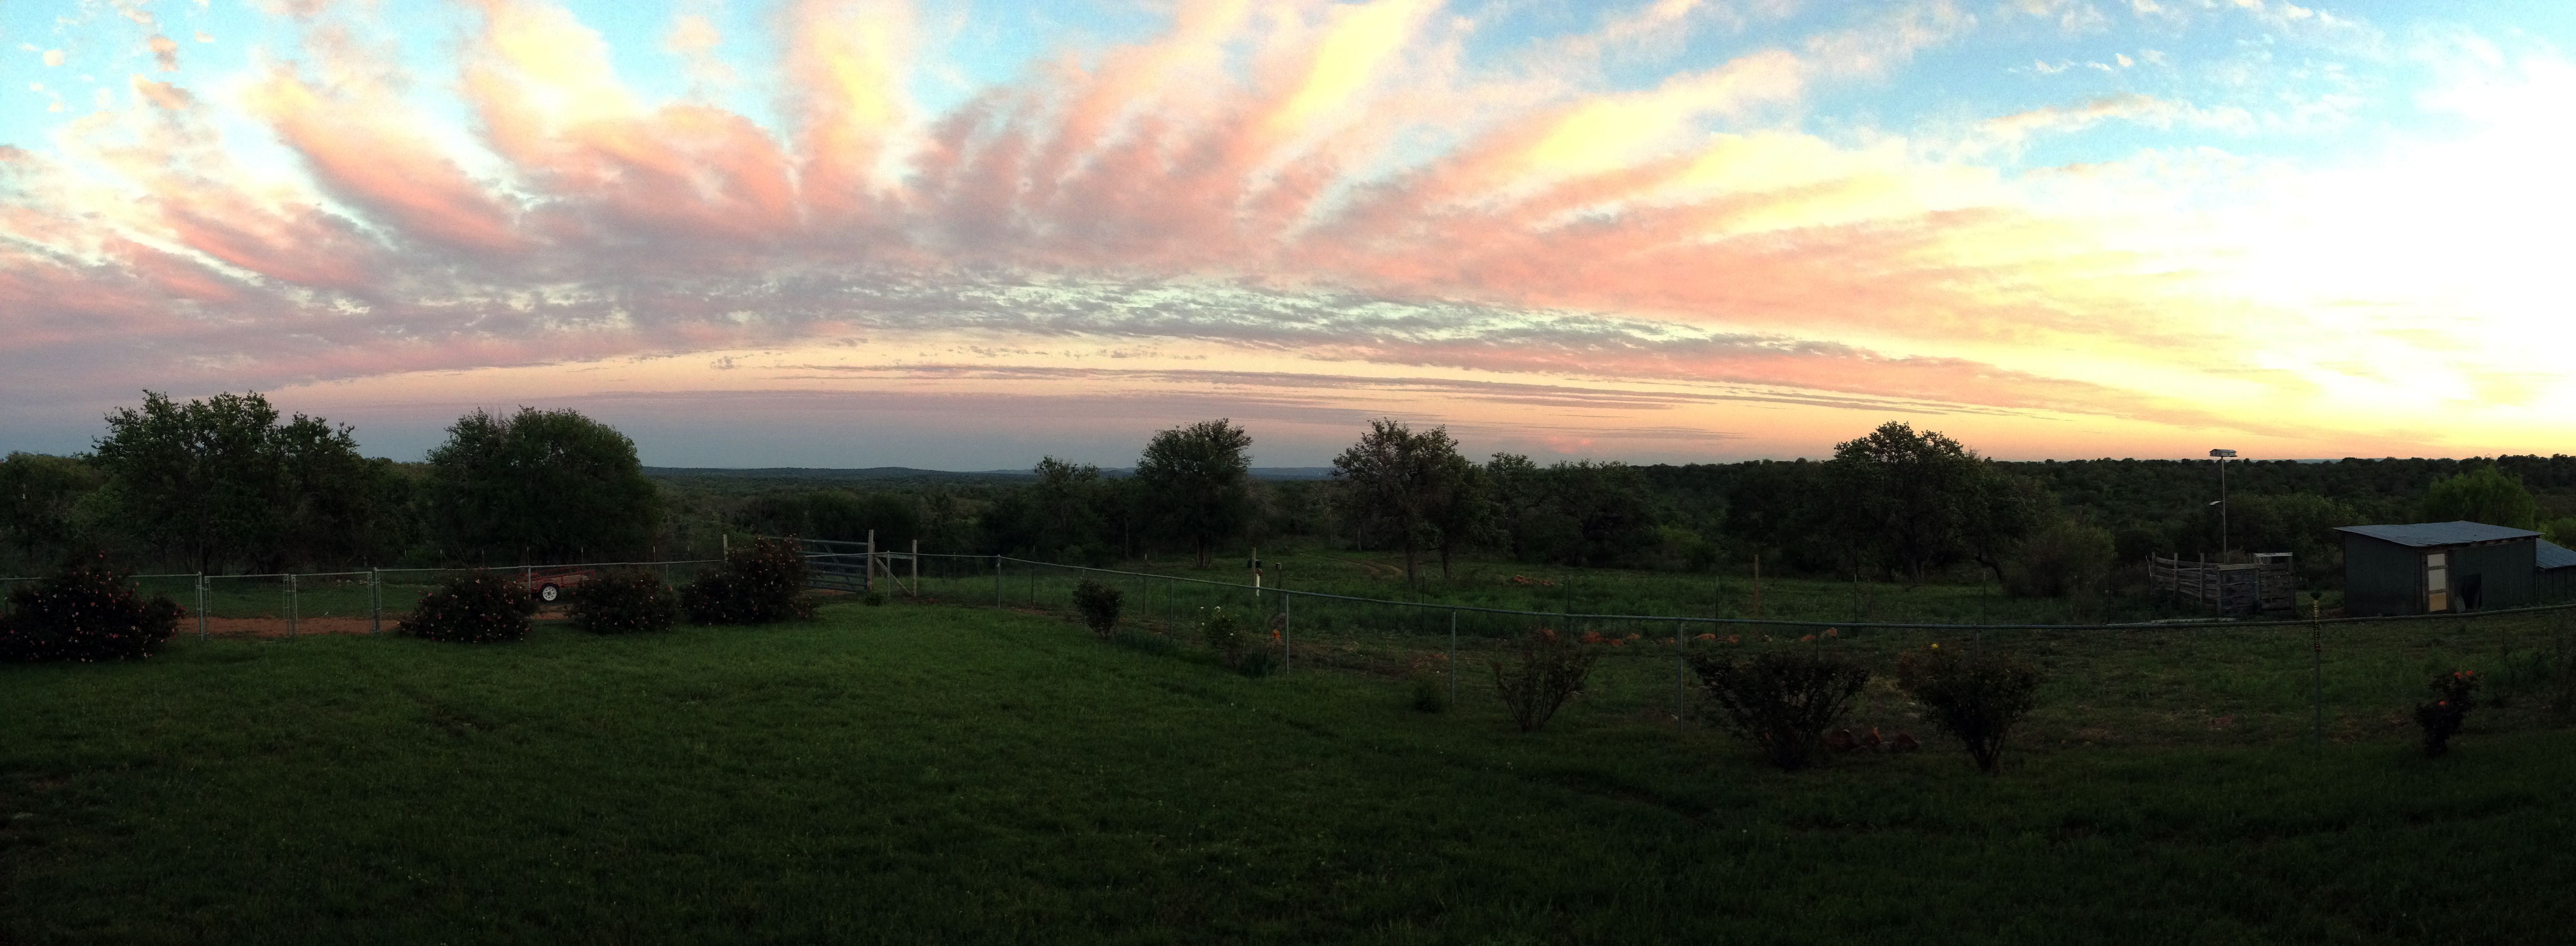 Late evening looking over Llano River Valley | Valley Spring Dusk ...